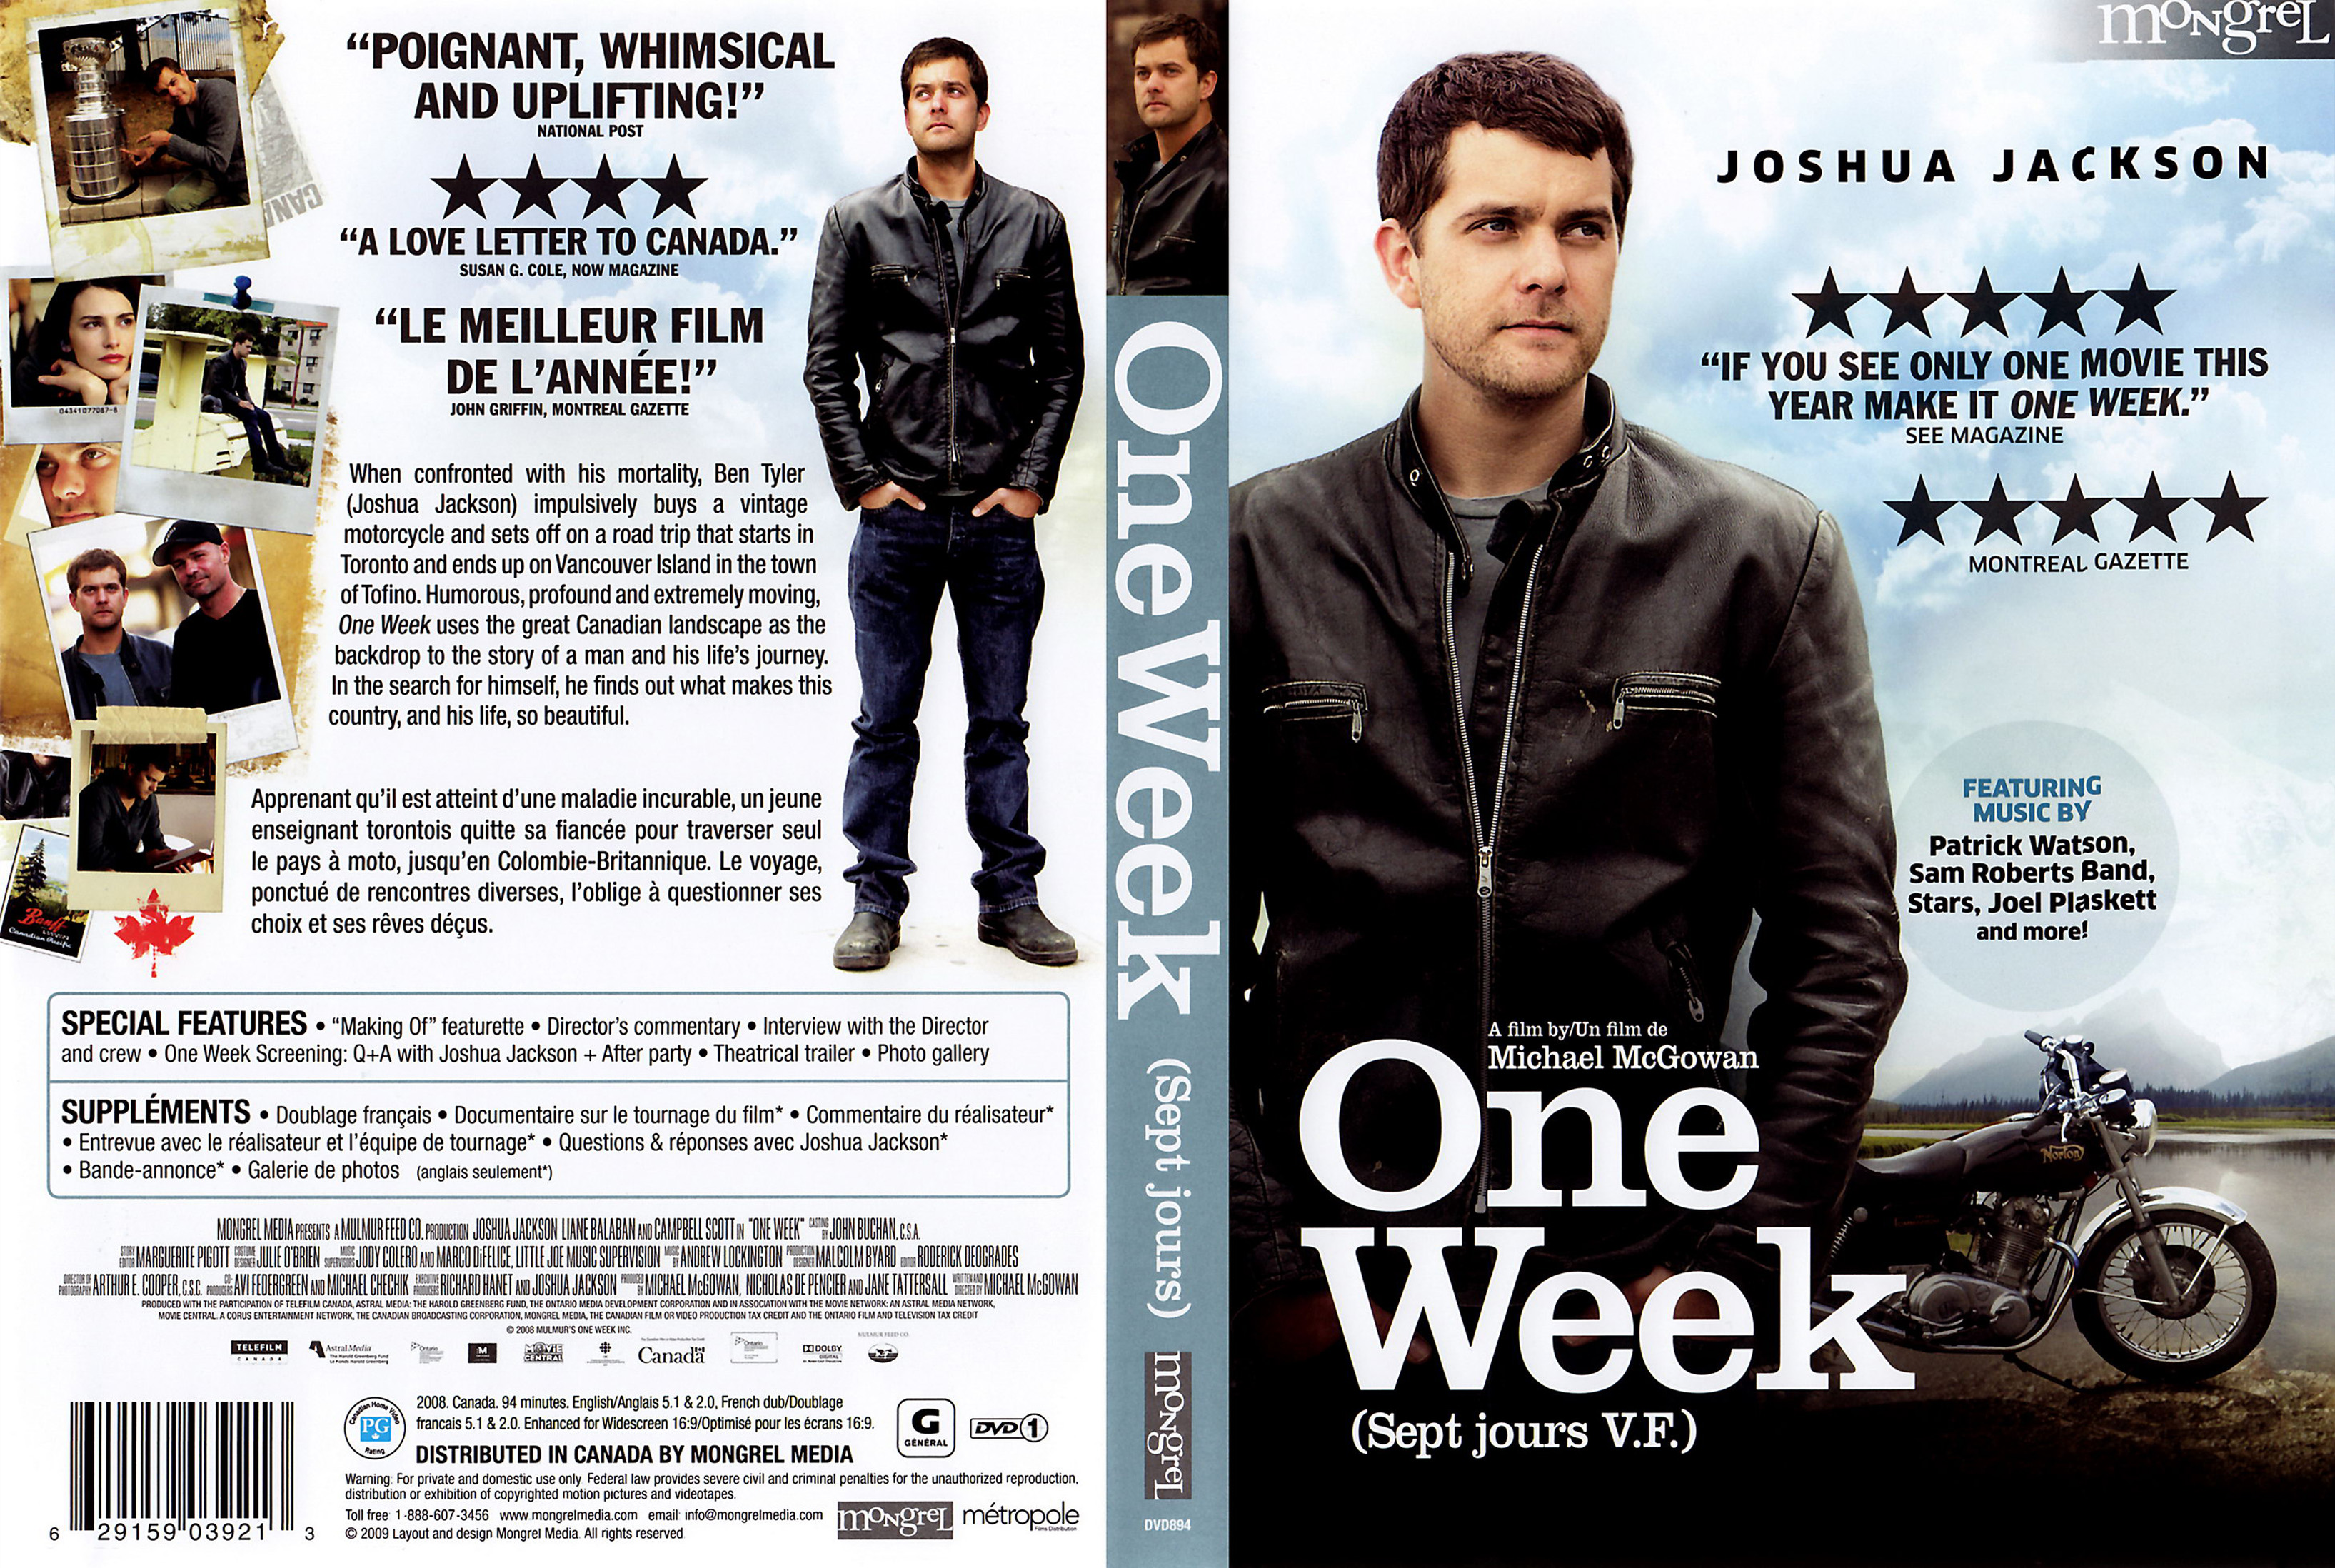 Jaquette DVD One week - Sept jours (Canadienne)